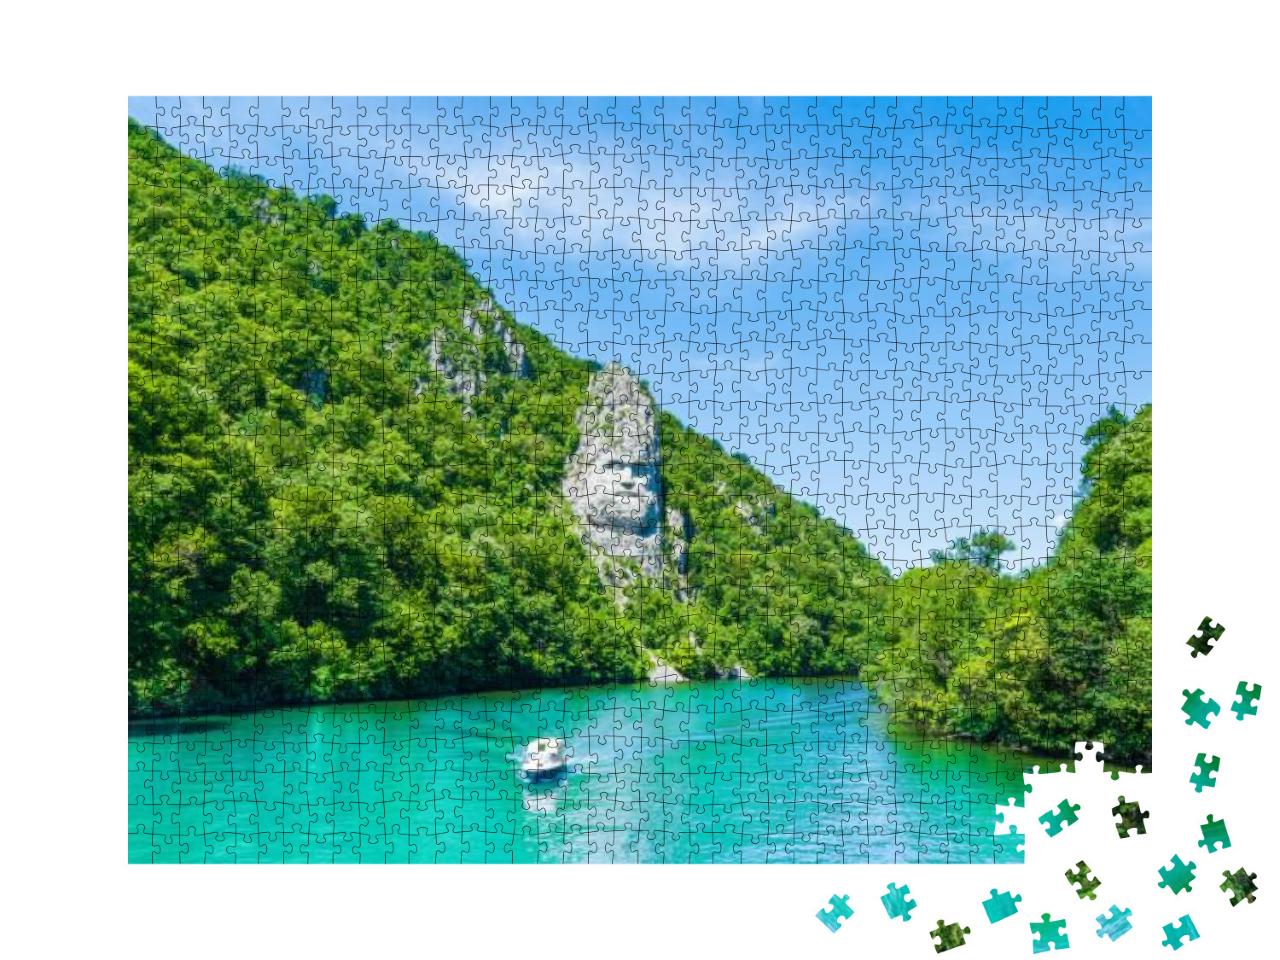 Decebal Statue on the Danube River, Romania... Jigsaw Puzzle with 1000 pieces